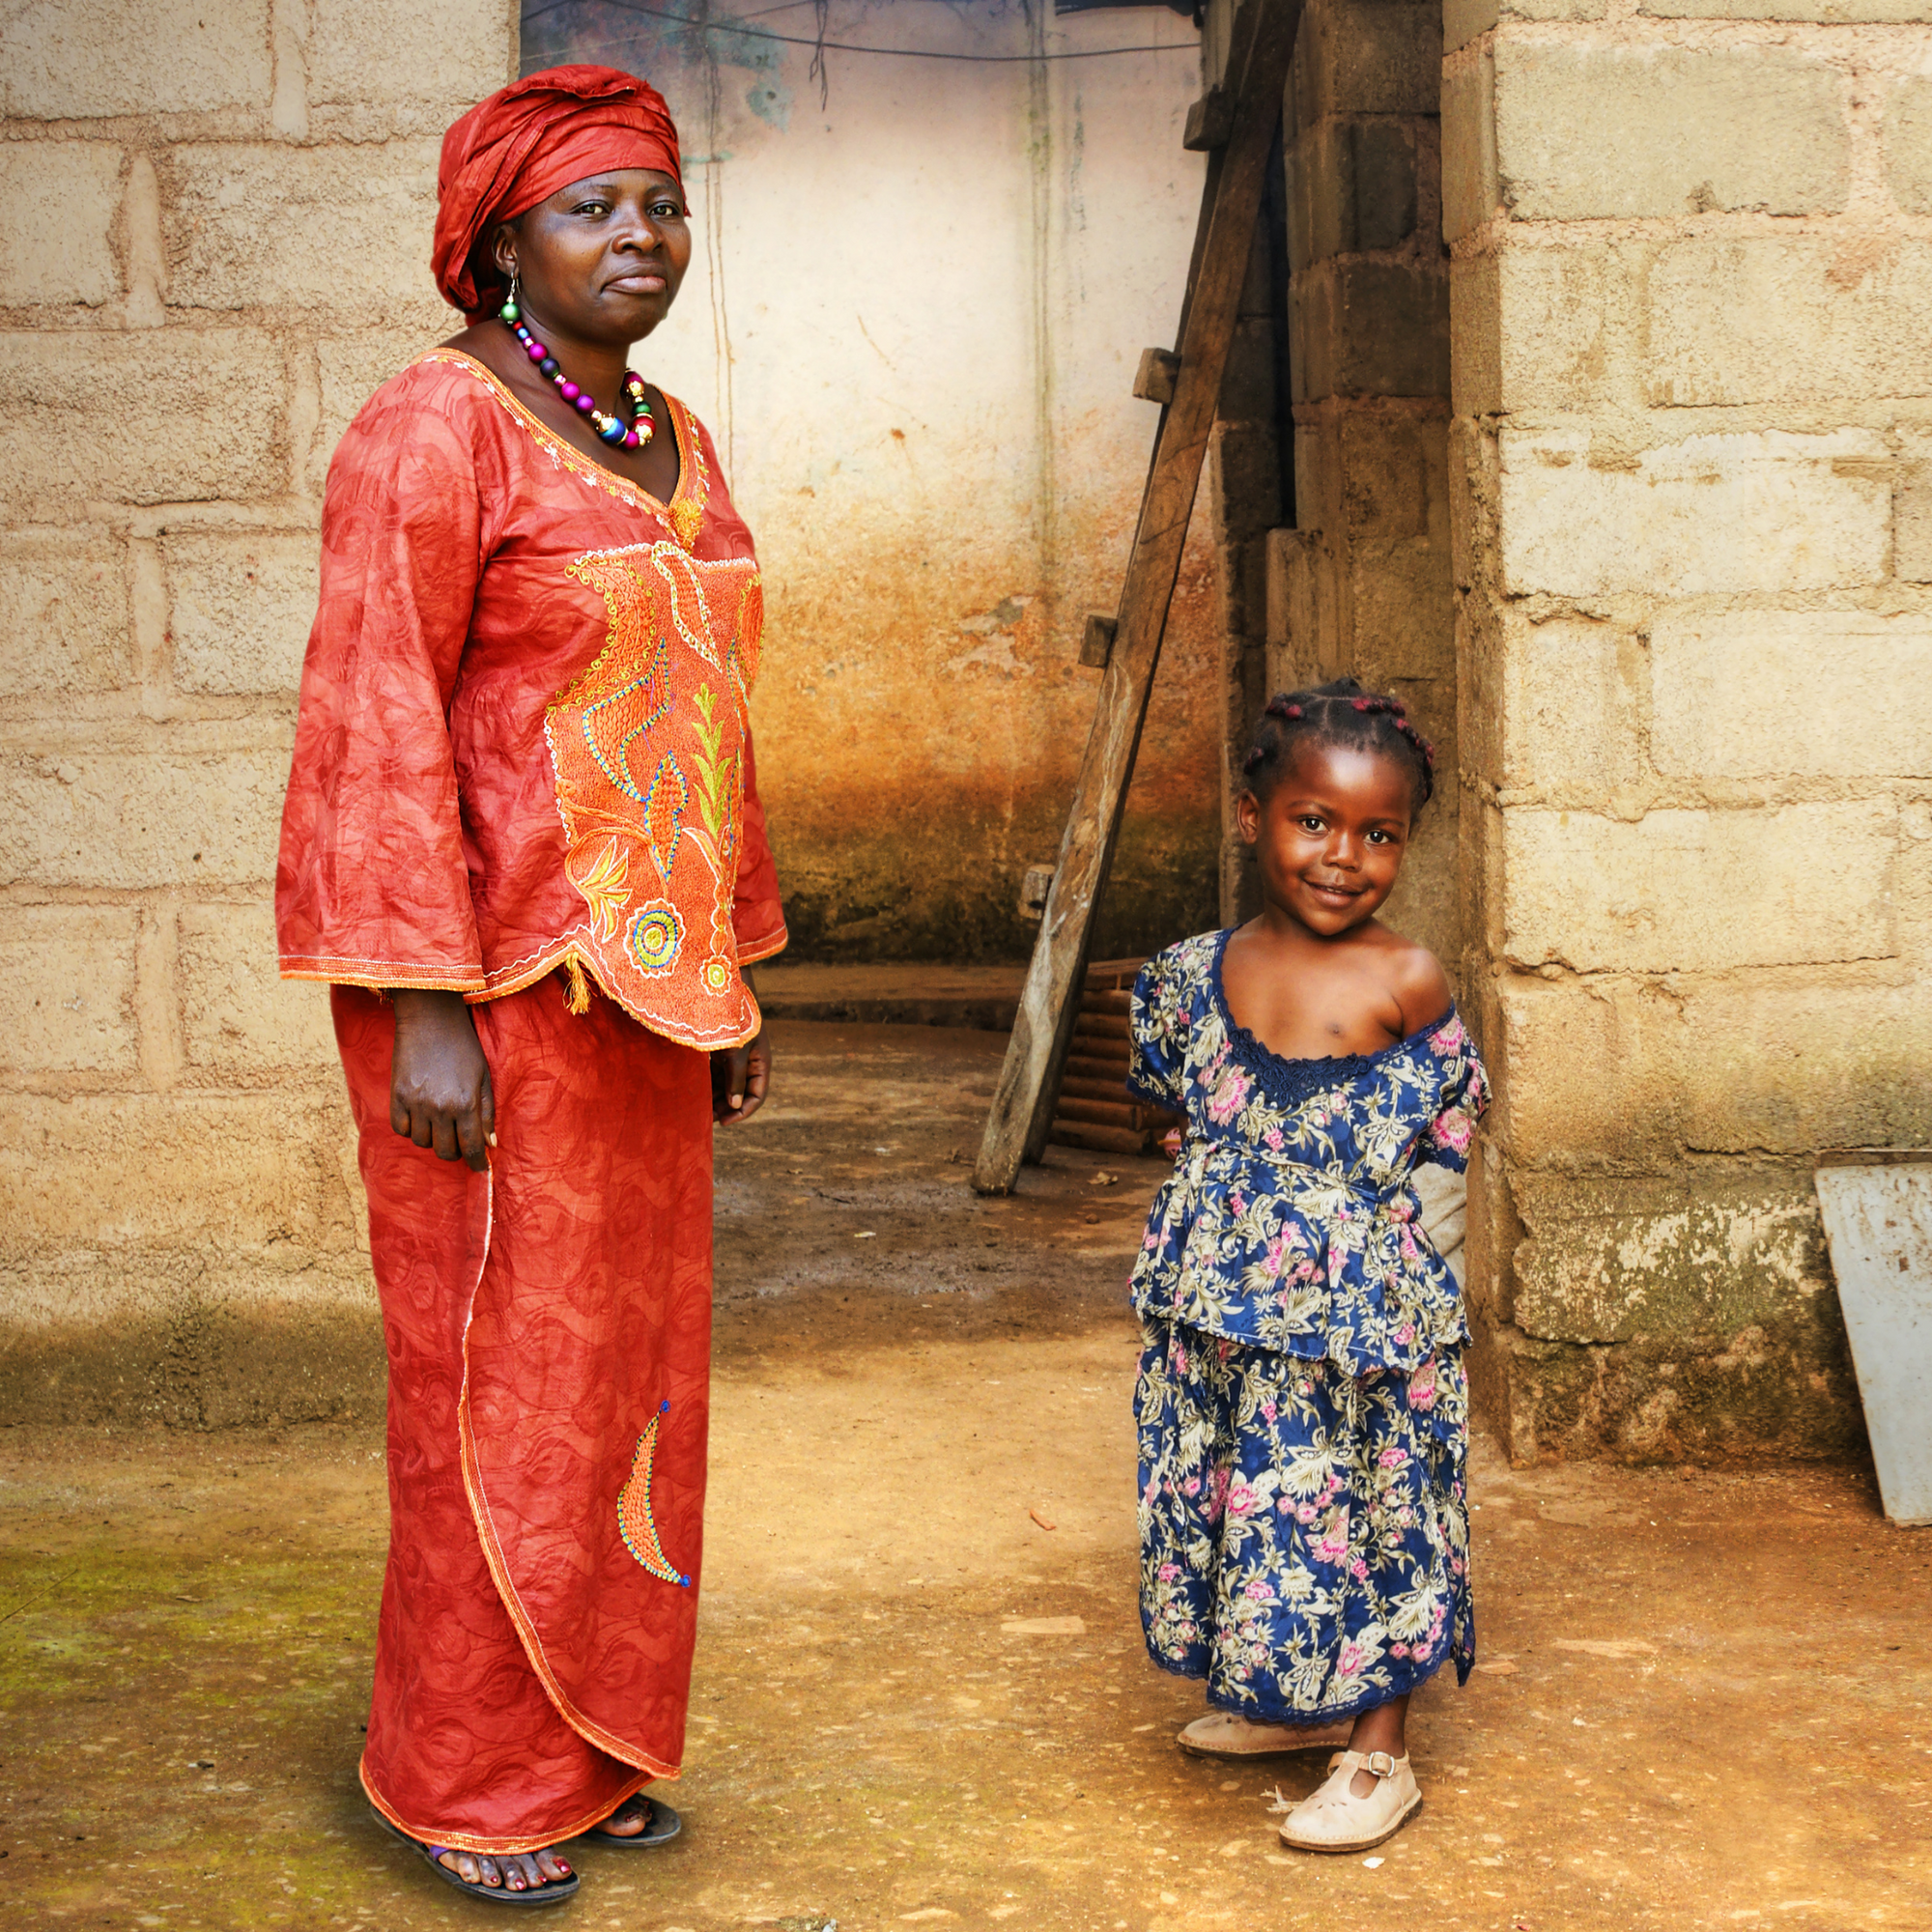 An African woman, dressed in traditional attire, and her child standing together in a rural African village, embodying a sense of culture, heritage, and familial warmth